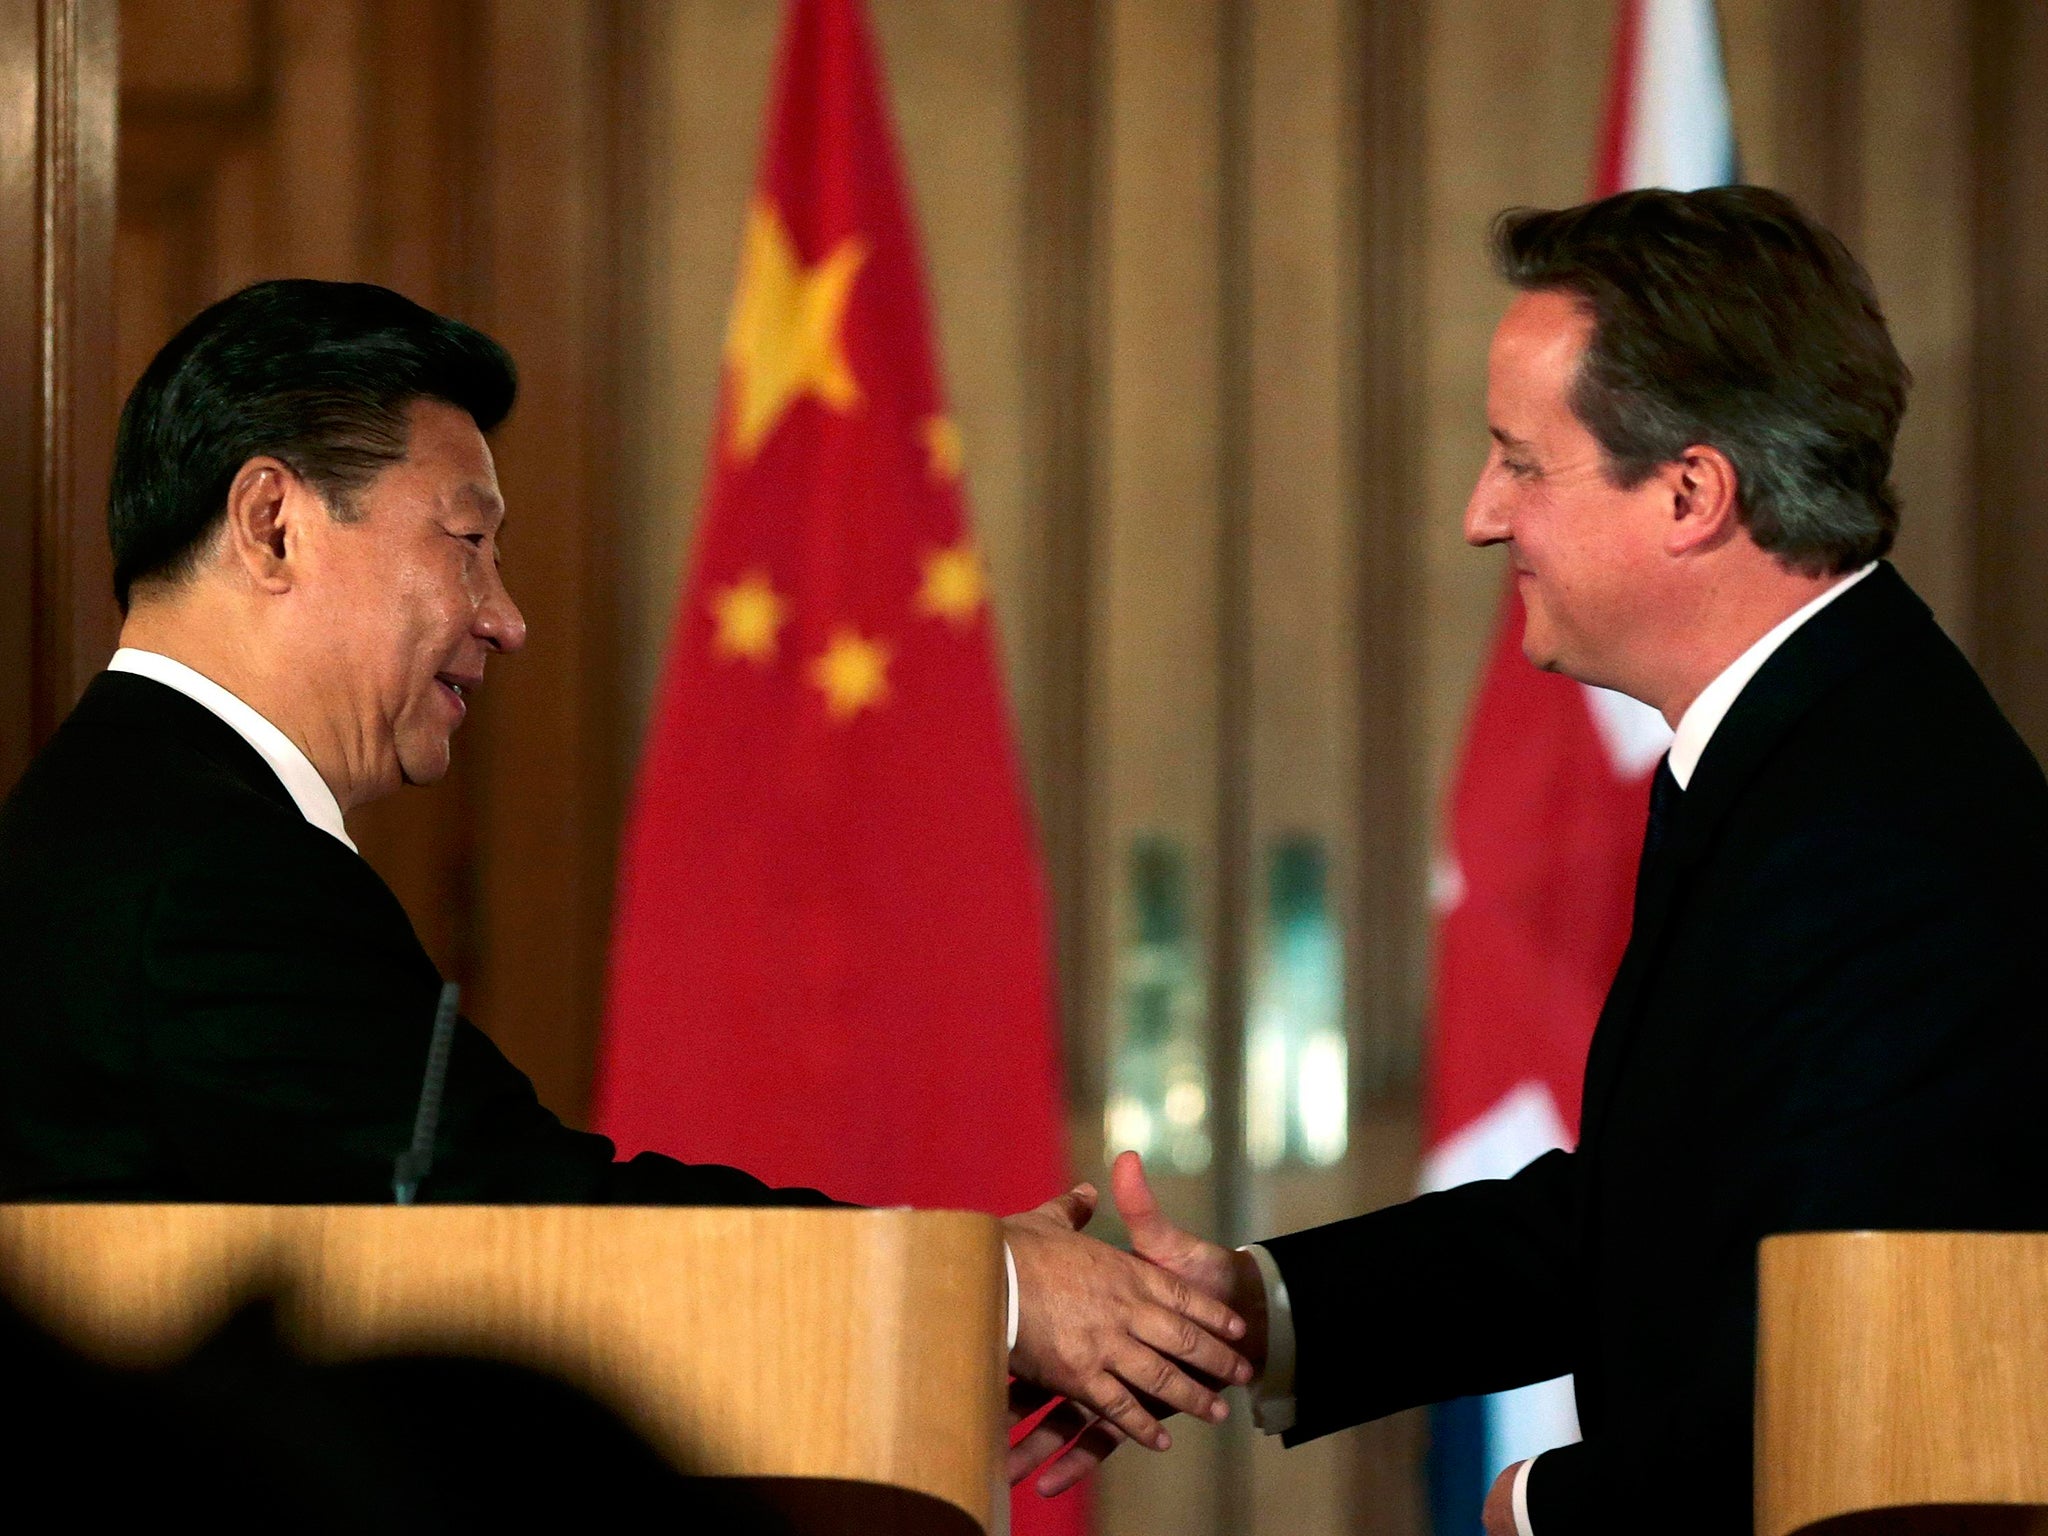 President Xi gave a short press conference with David Cameron